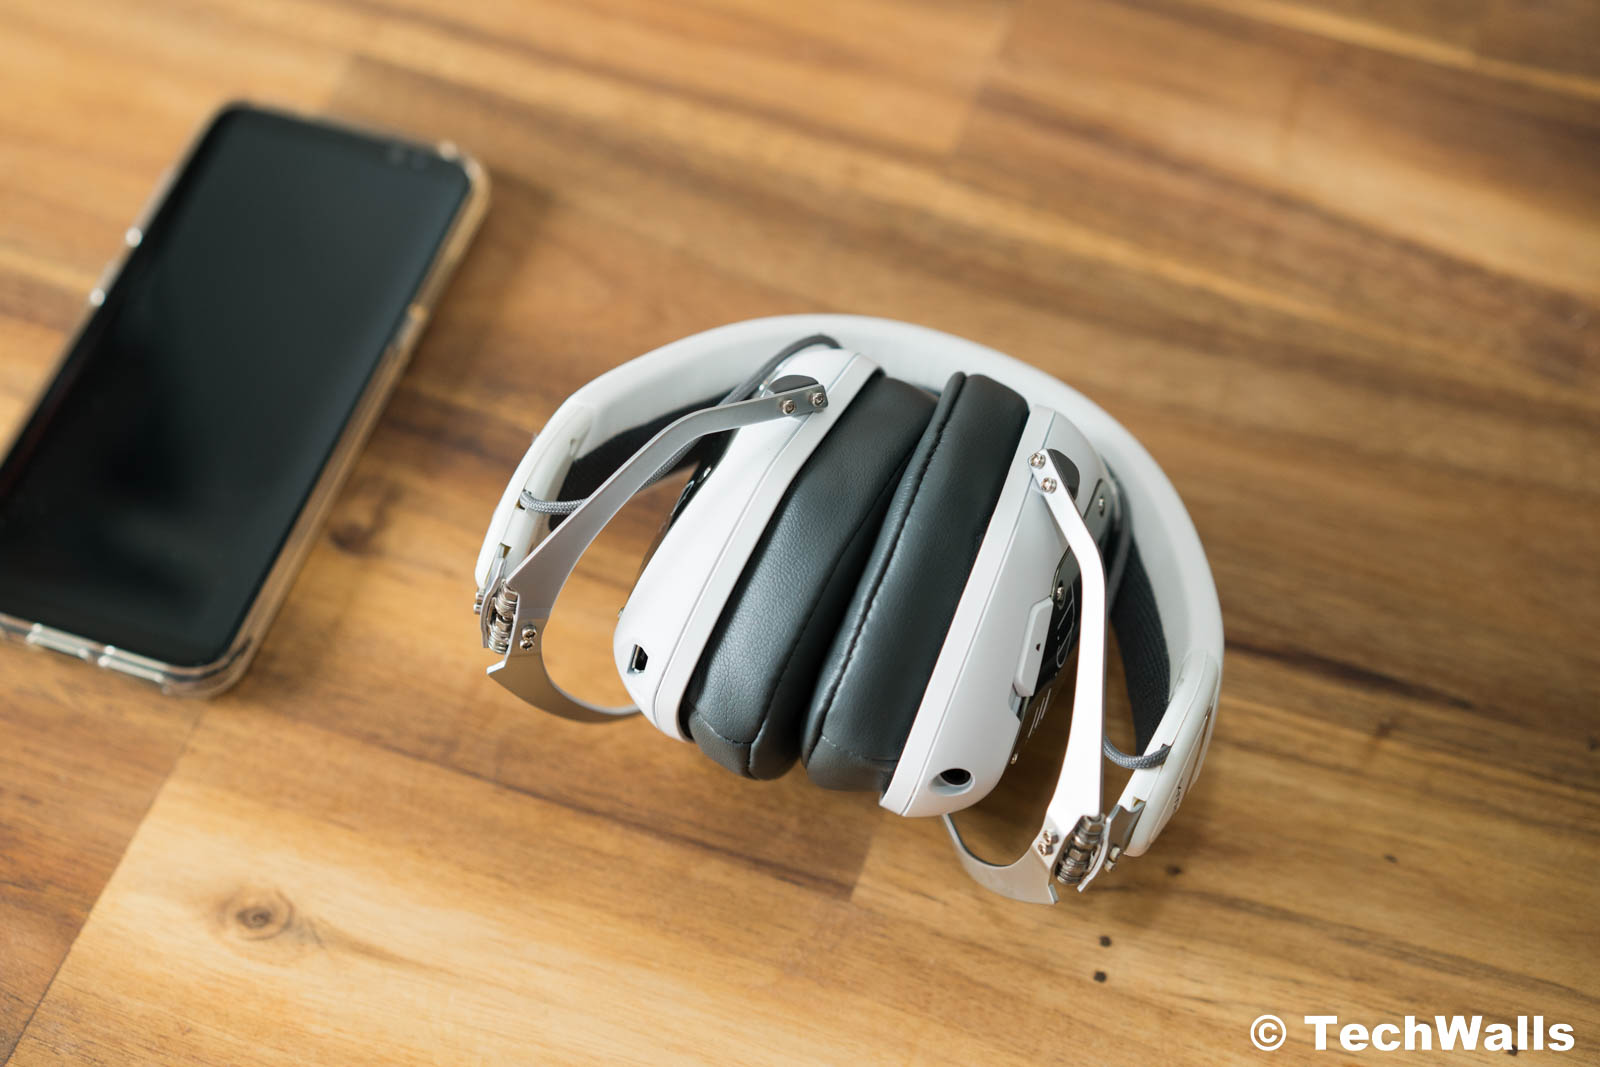 Ringlet Mild fusion V-MODA Crossfade 2 Wireless Over-Ear Headphones Review - What A Surprise!